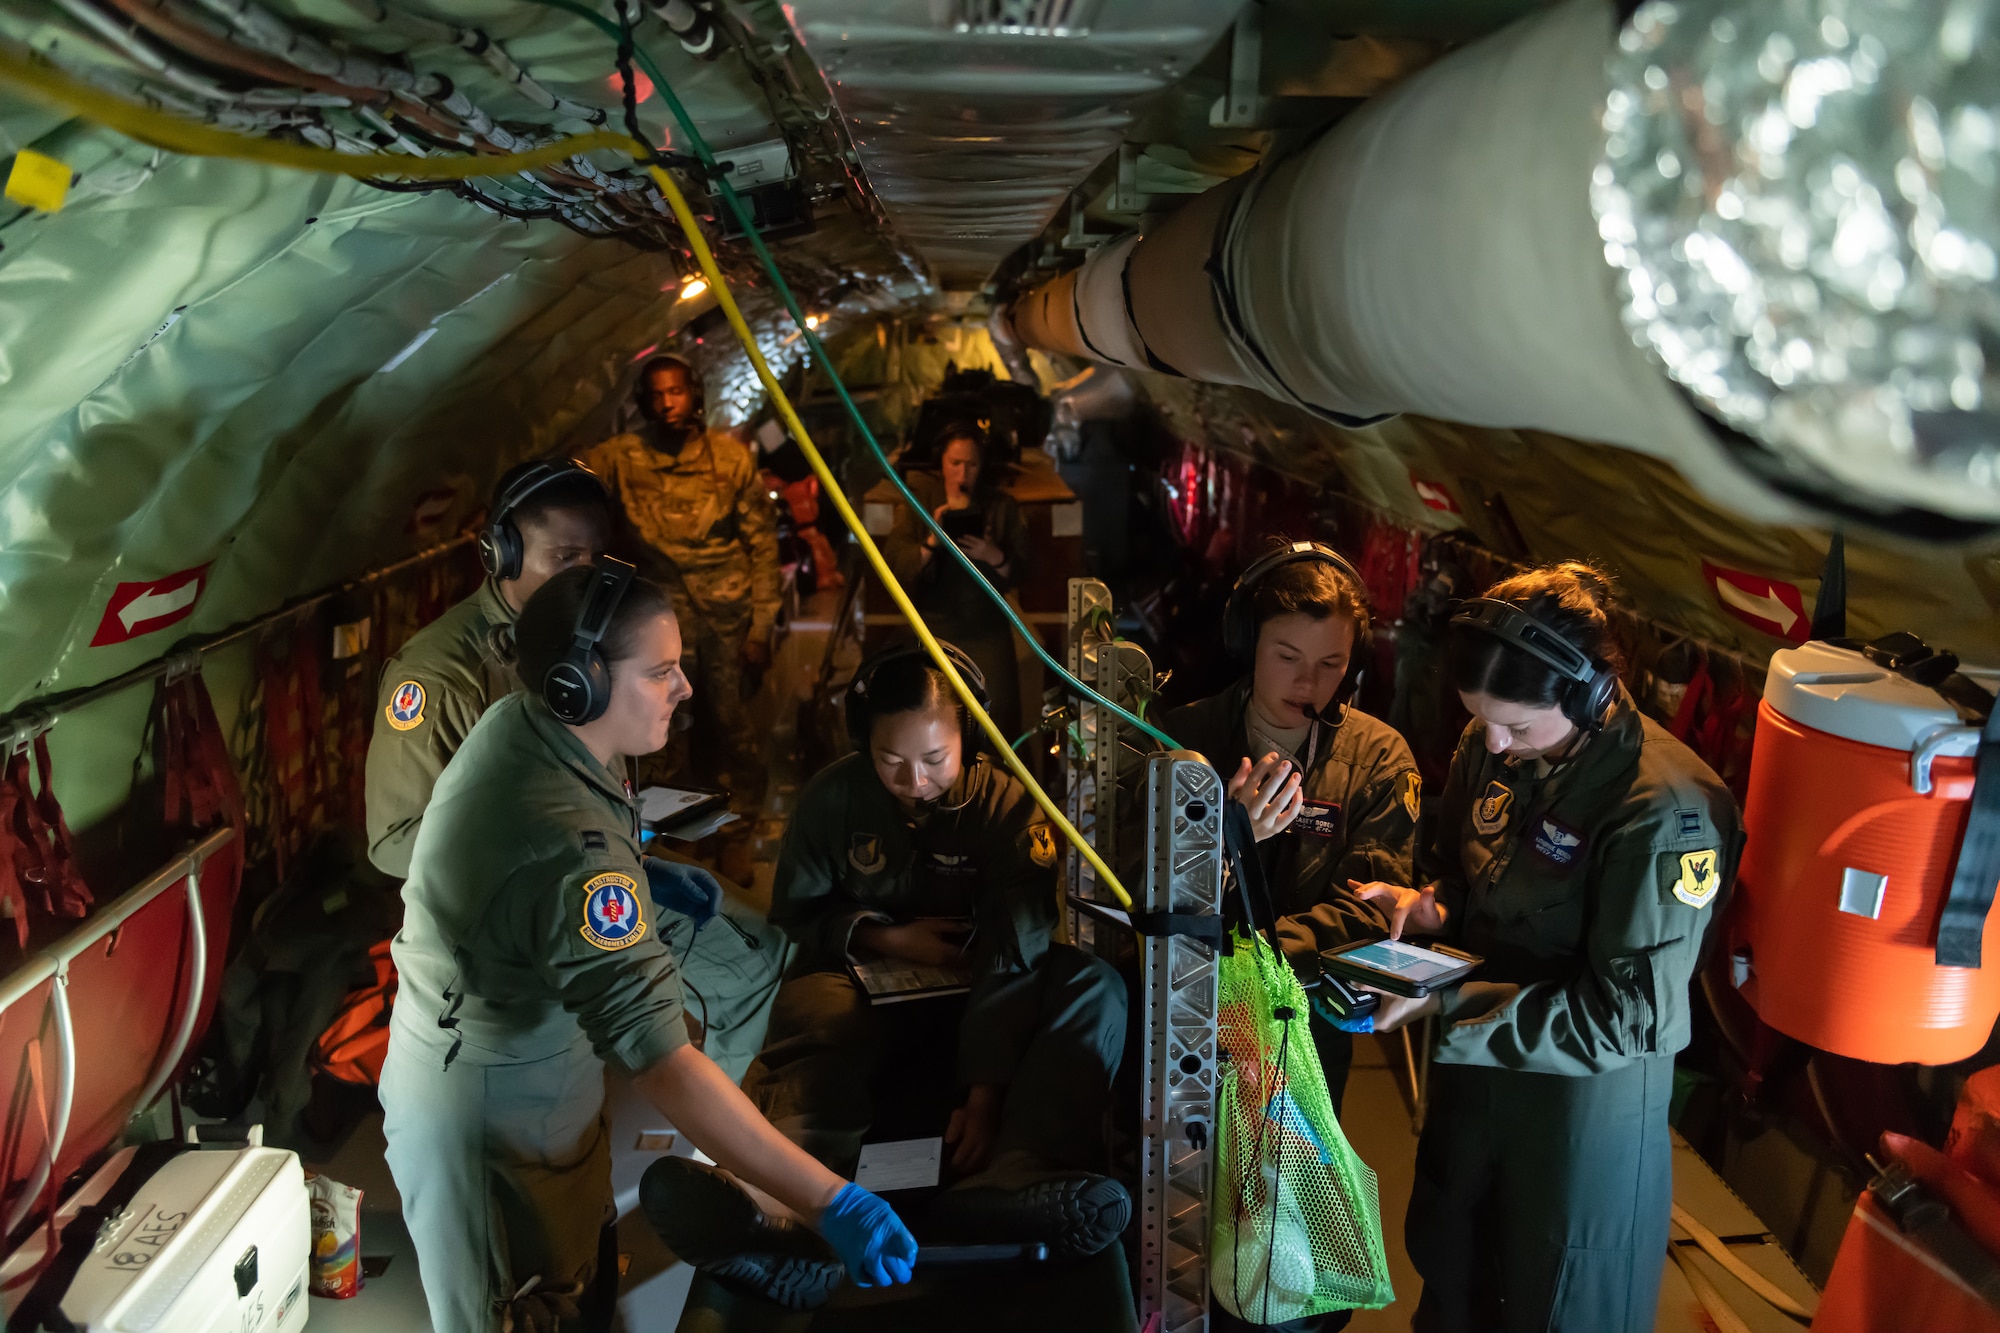 Airmen from the 18th Aeromedical Evacuation Squadron triage a patient onboard a KC-135 Stratotanker during an exercise May 8th, 2019, out of Kadena Air Base, Japan. The 18th AES maintains a forward operating presence and supports medical contingencies in a free-and-open Indo-Pacific. (U.S. Air Force photo by Airman 1st Class Matthew Seefeldt)